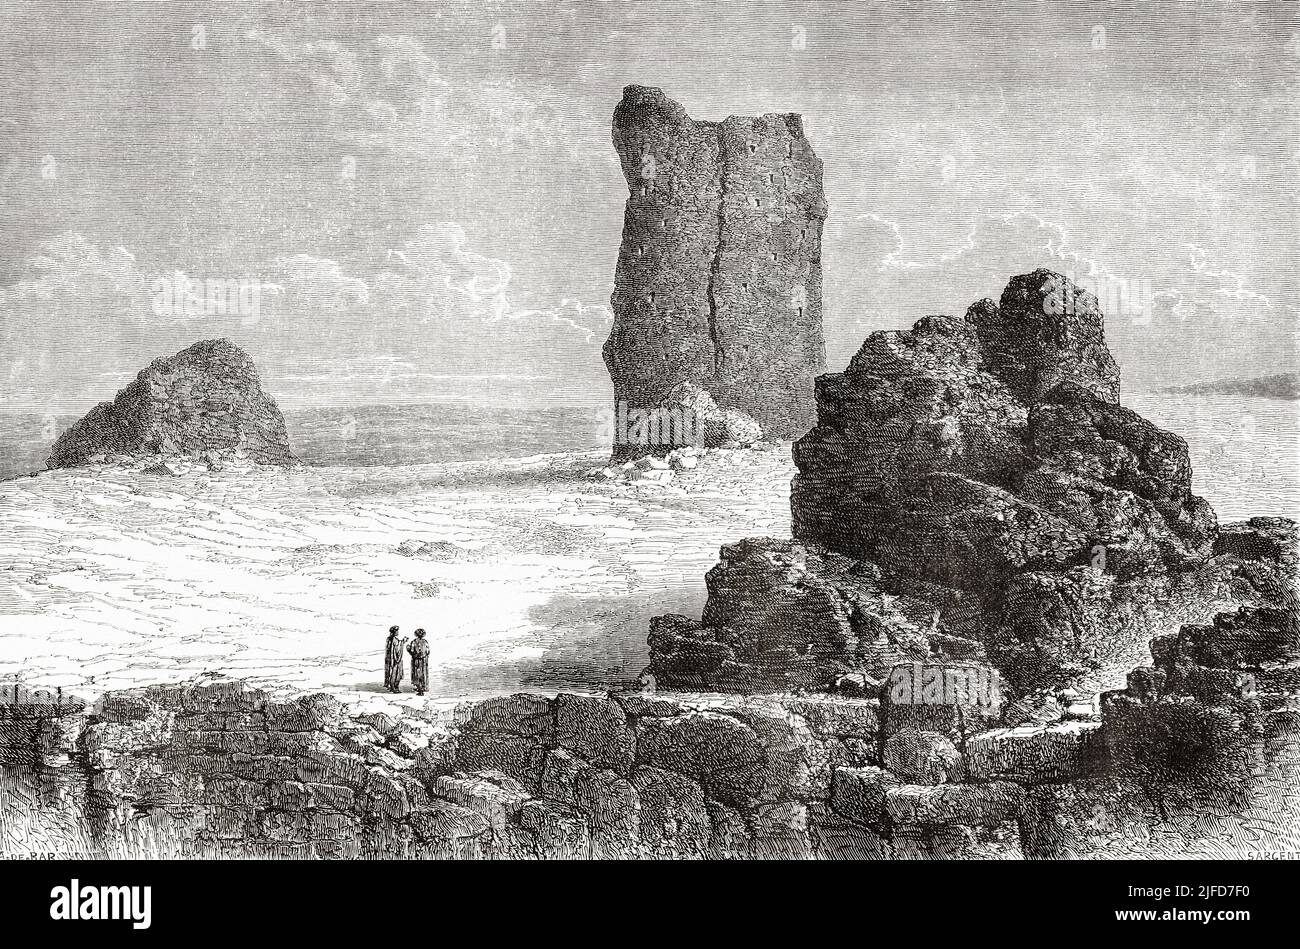 Tower of Babel, Iraq. Journey to Babylon by Guillaume Lejean 1866 from Le Tour du Monde 1867 Stock Photo